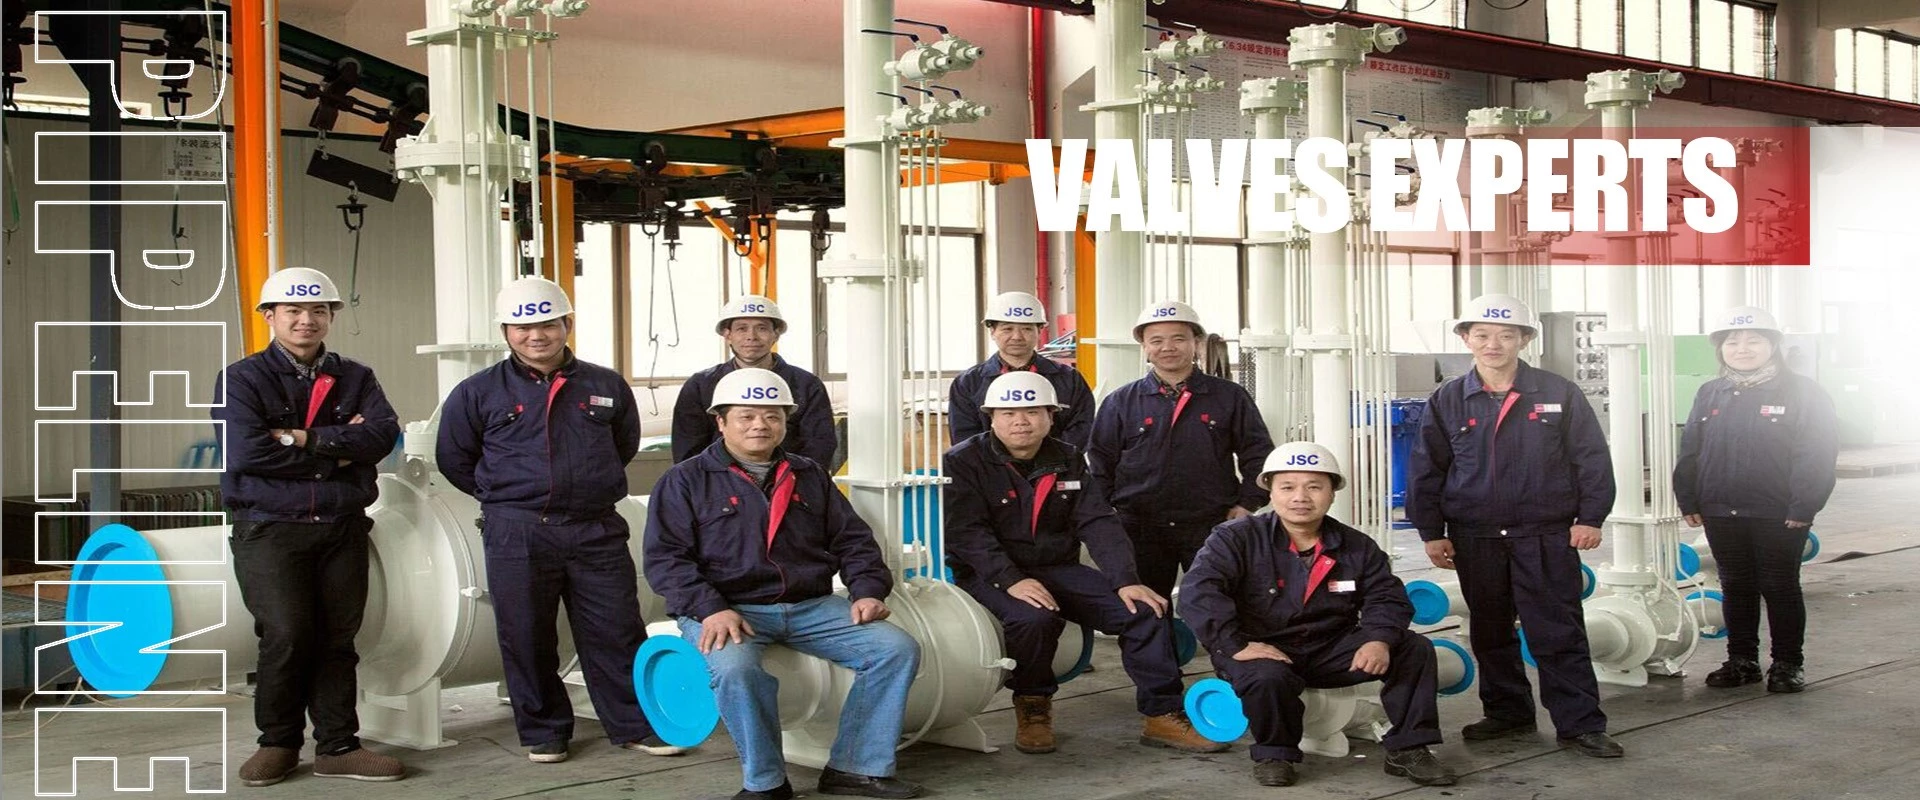 Top Valves Experts